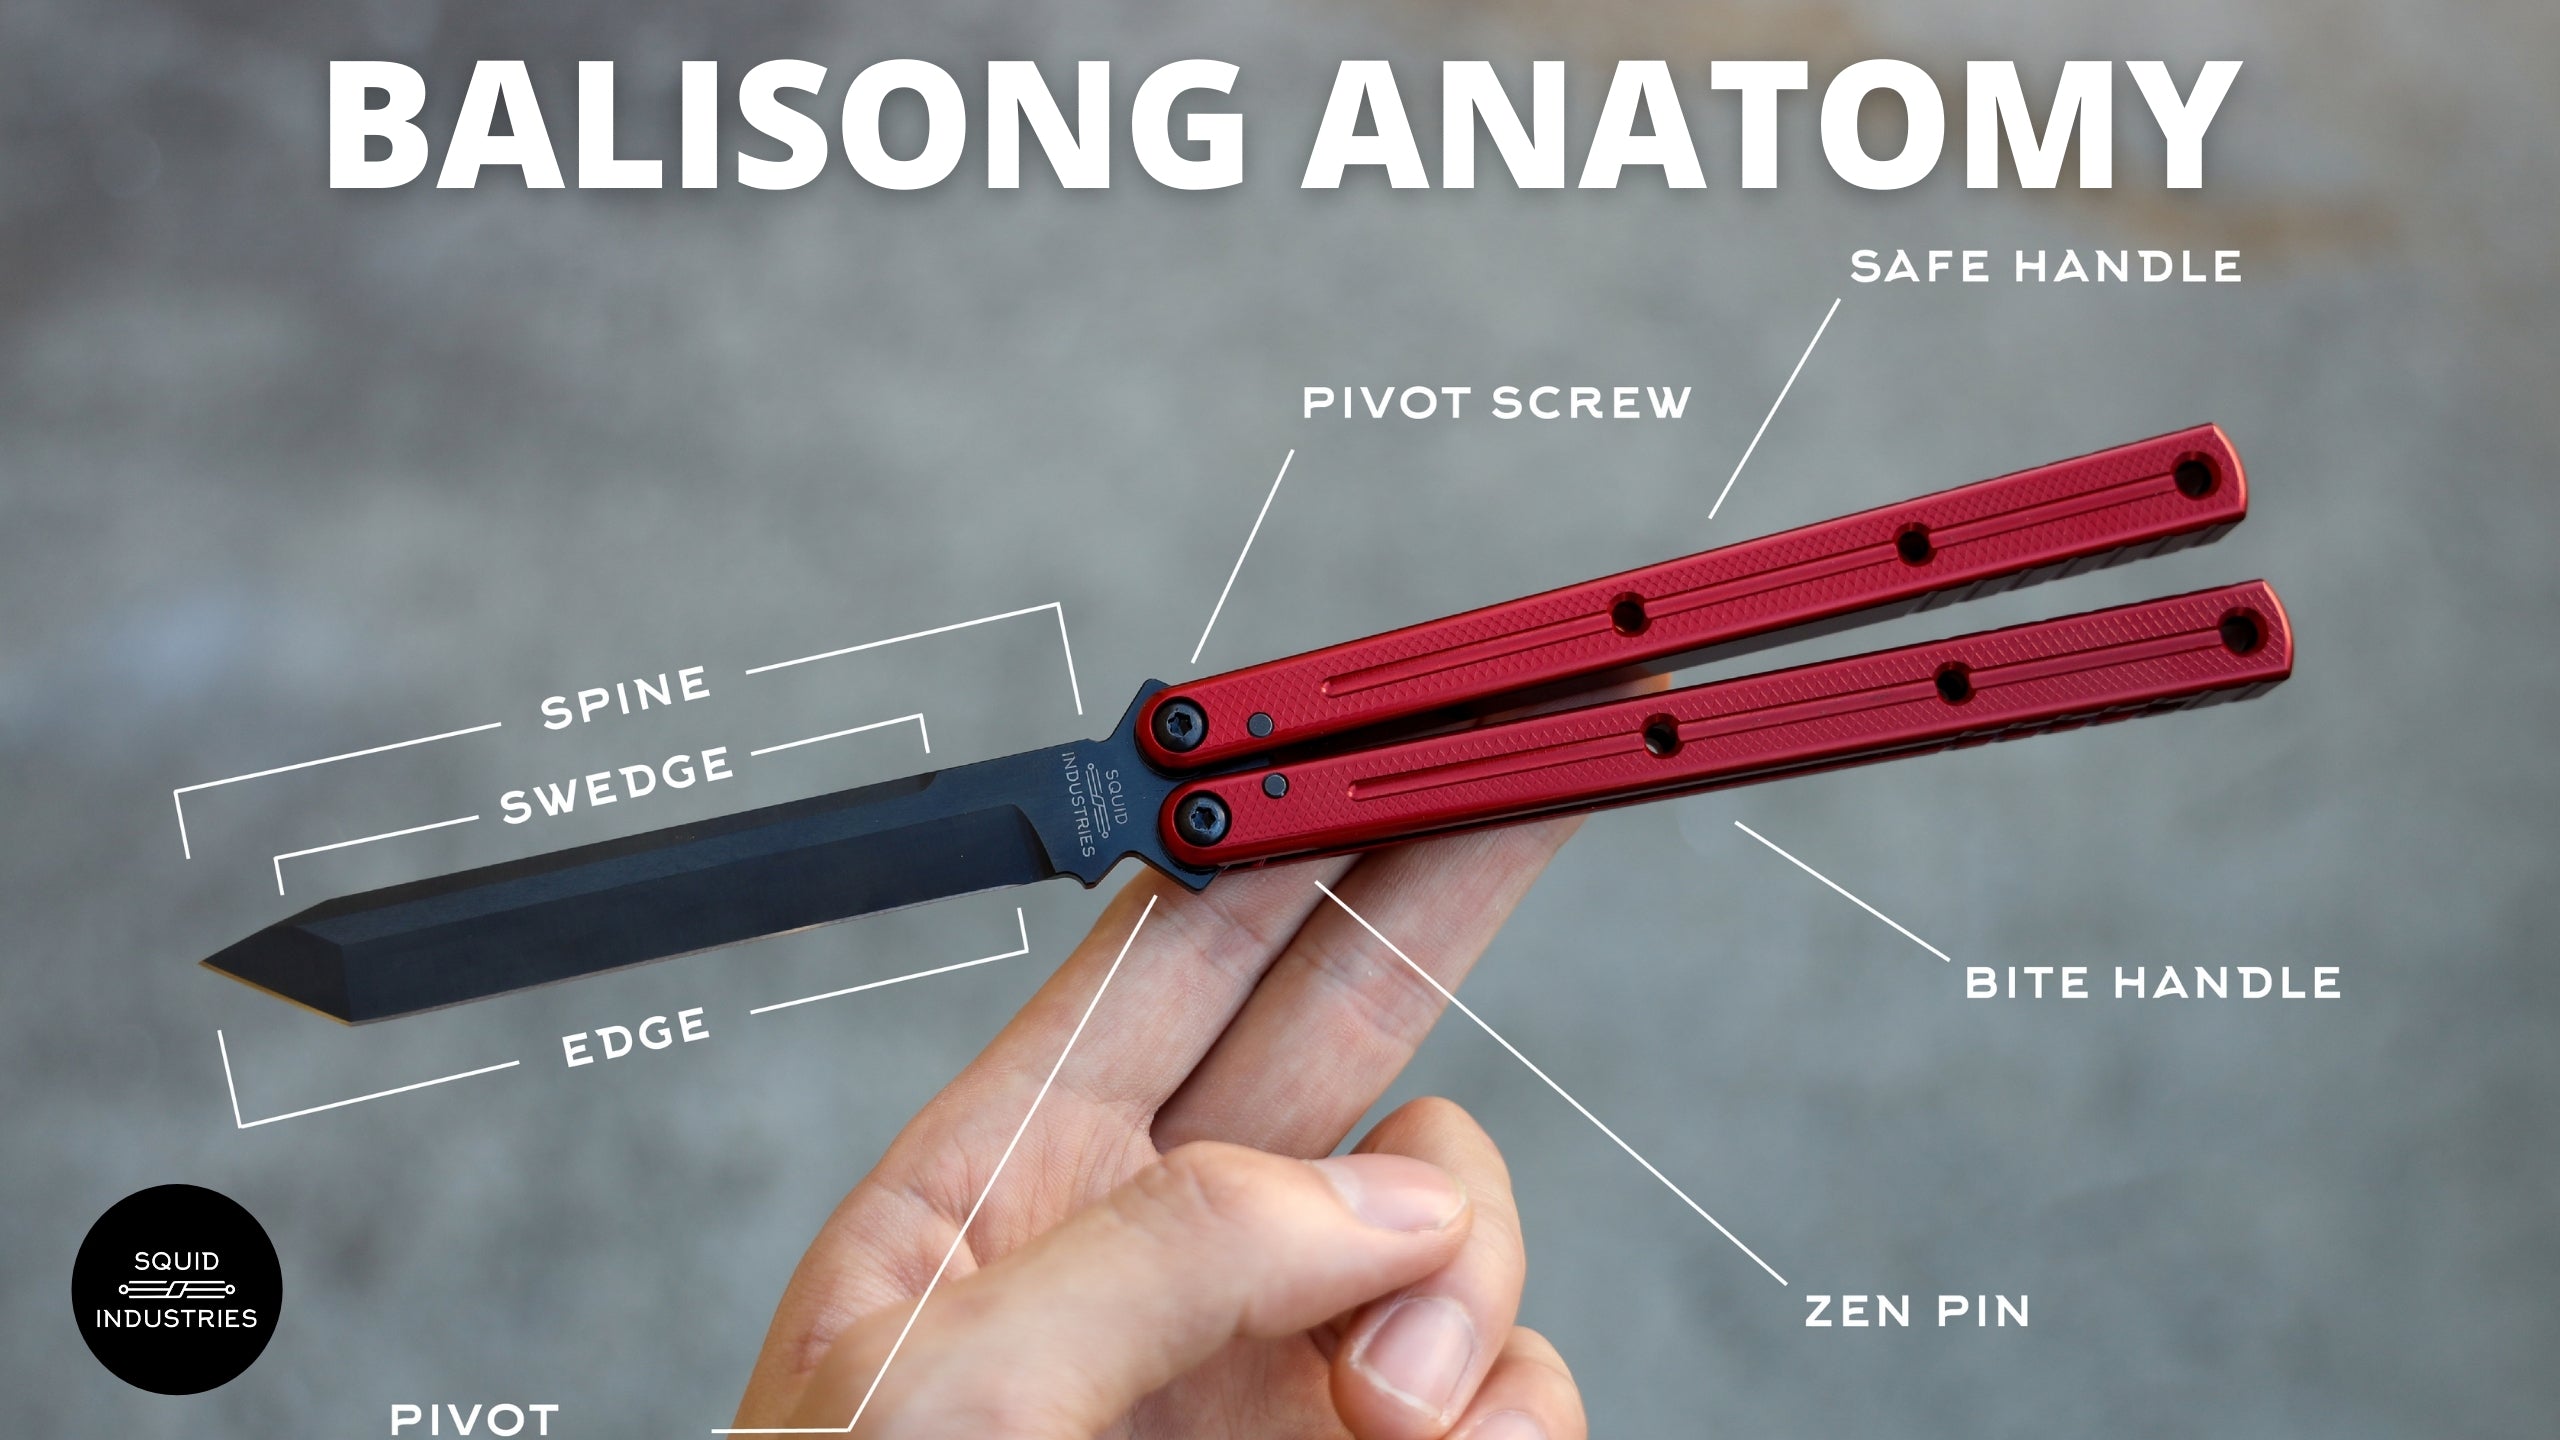 cool butterfly knife